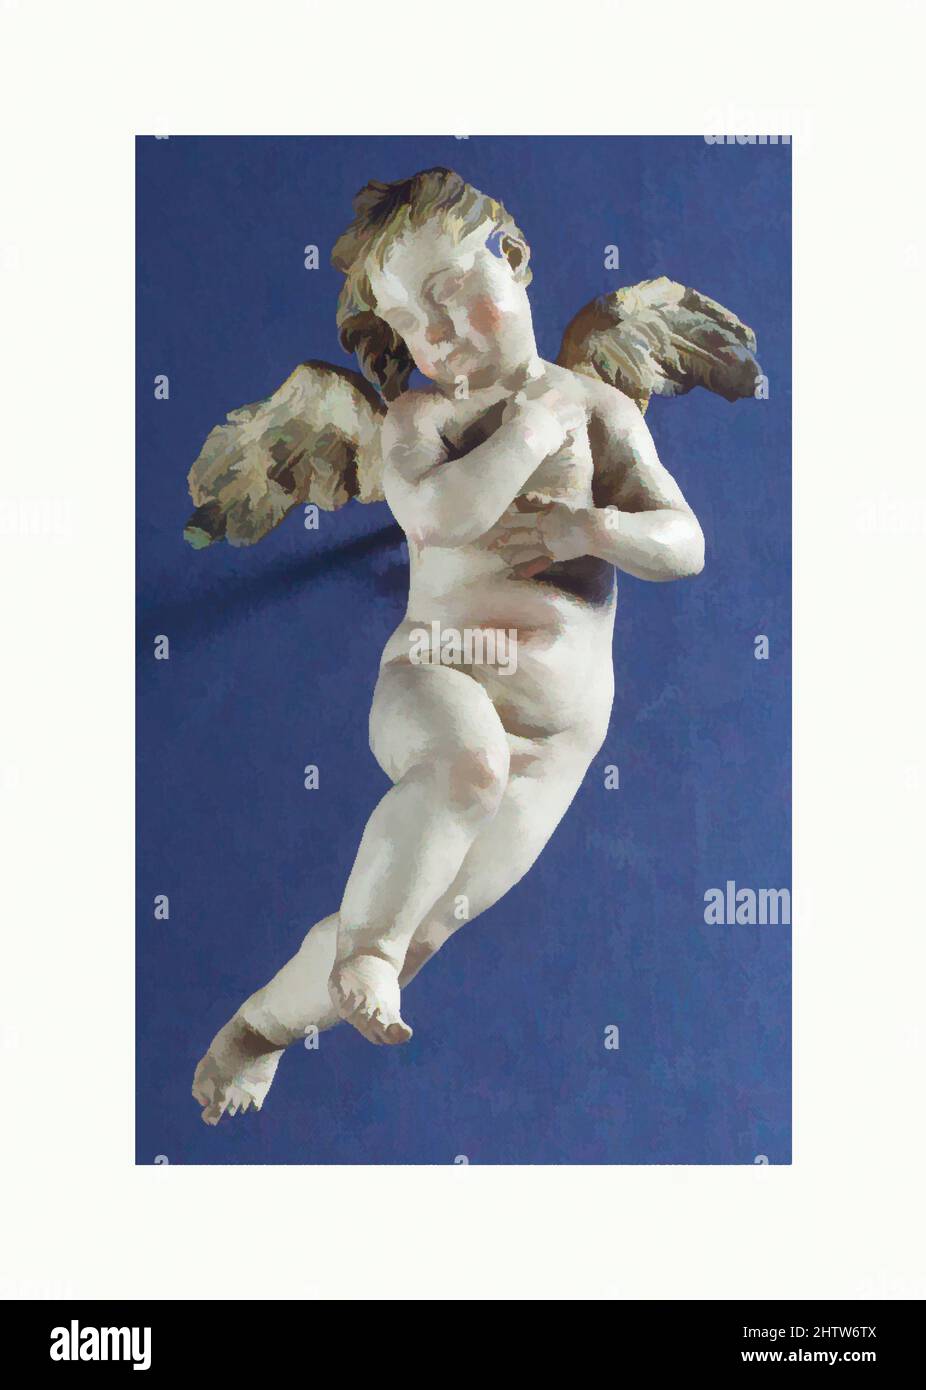 Art inspired by Cherub, second half 18th century, Italian, Naples, Polychromed terracotta, H. 6 1/4 in. (15.9 cm.), Crèche, Classic works modernized by Artotop with a splash of modernity. Shapes, color and value, eye-catching visual impact on art. Emotions through freedom of artworks in a contemporary way. A timeless message pursuing a wildly creative new direction. Artists turning to the digital medium and creating the Artotop NFT Stock Photo